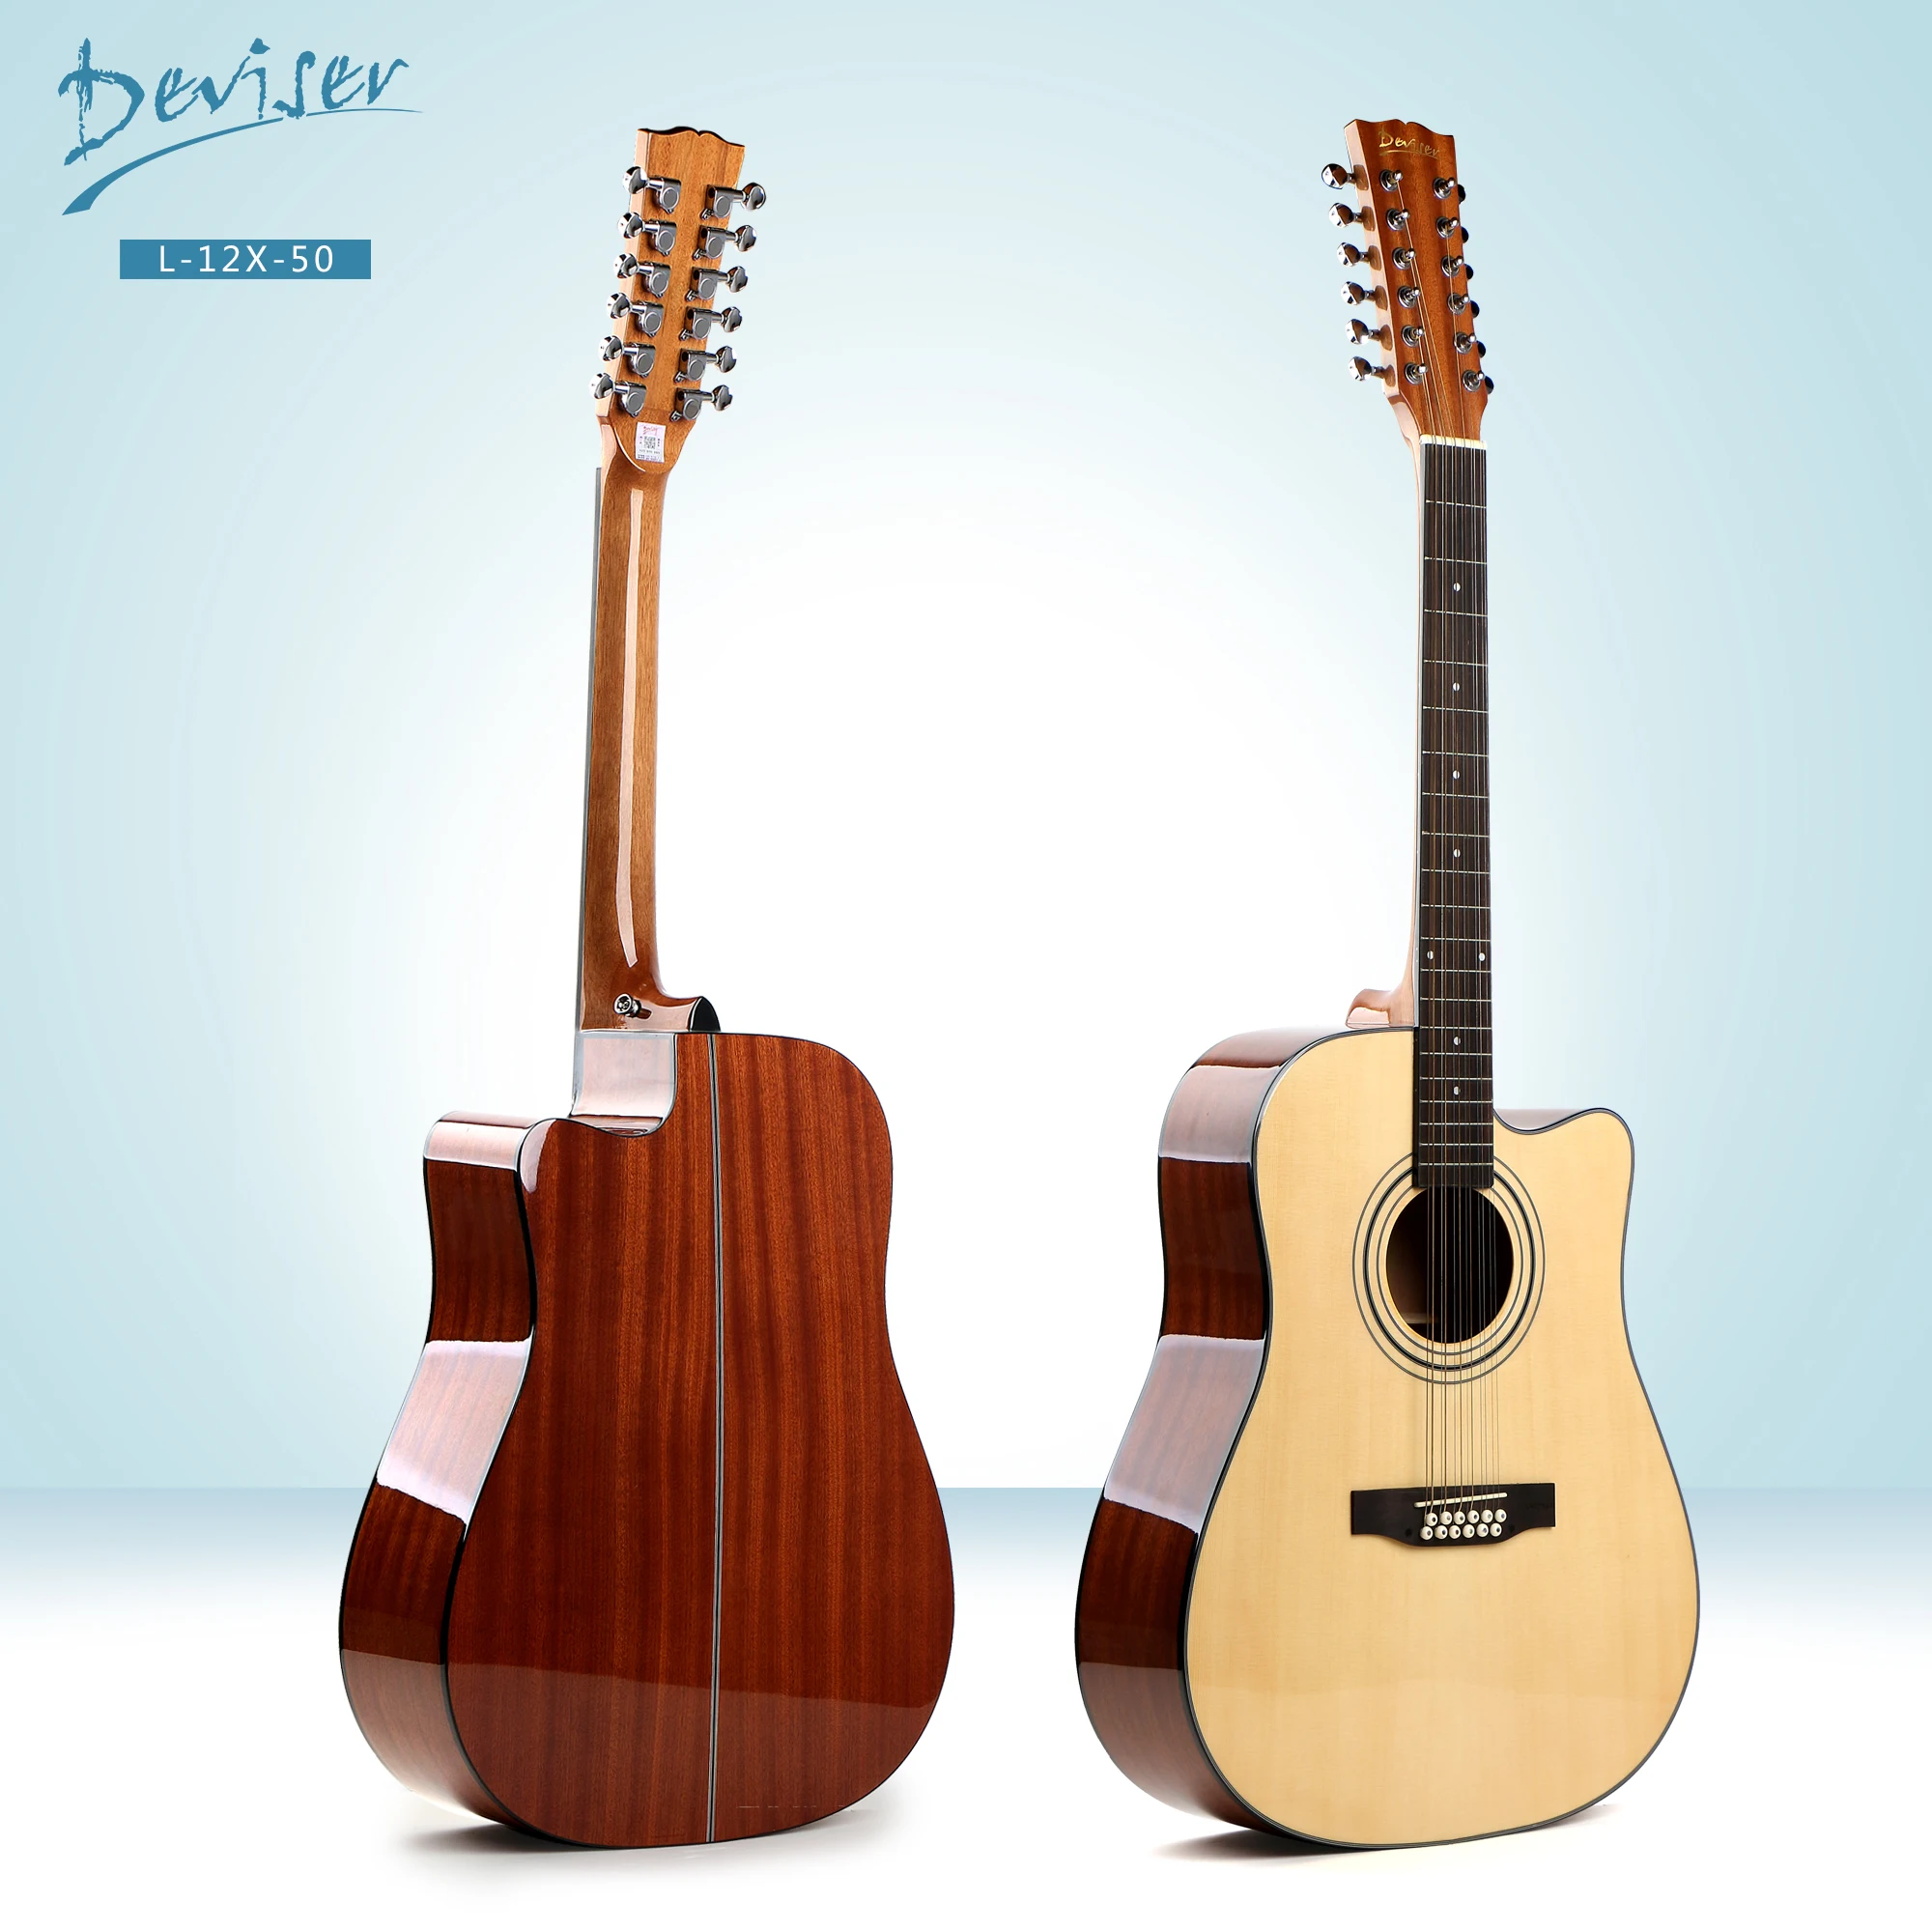 

12 strings acoustic guitar 41 inch cut away China wholesale OEM high quality music instrument L-12X-50, Natural